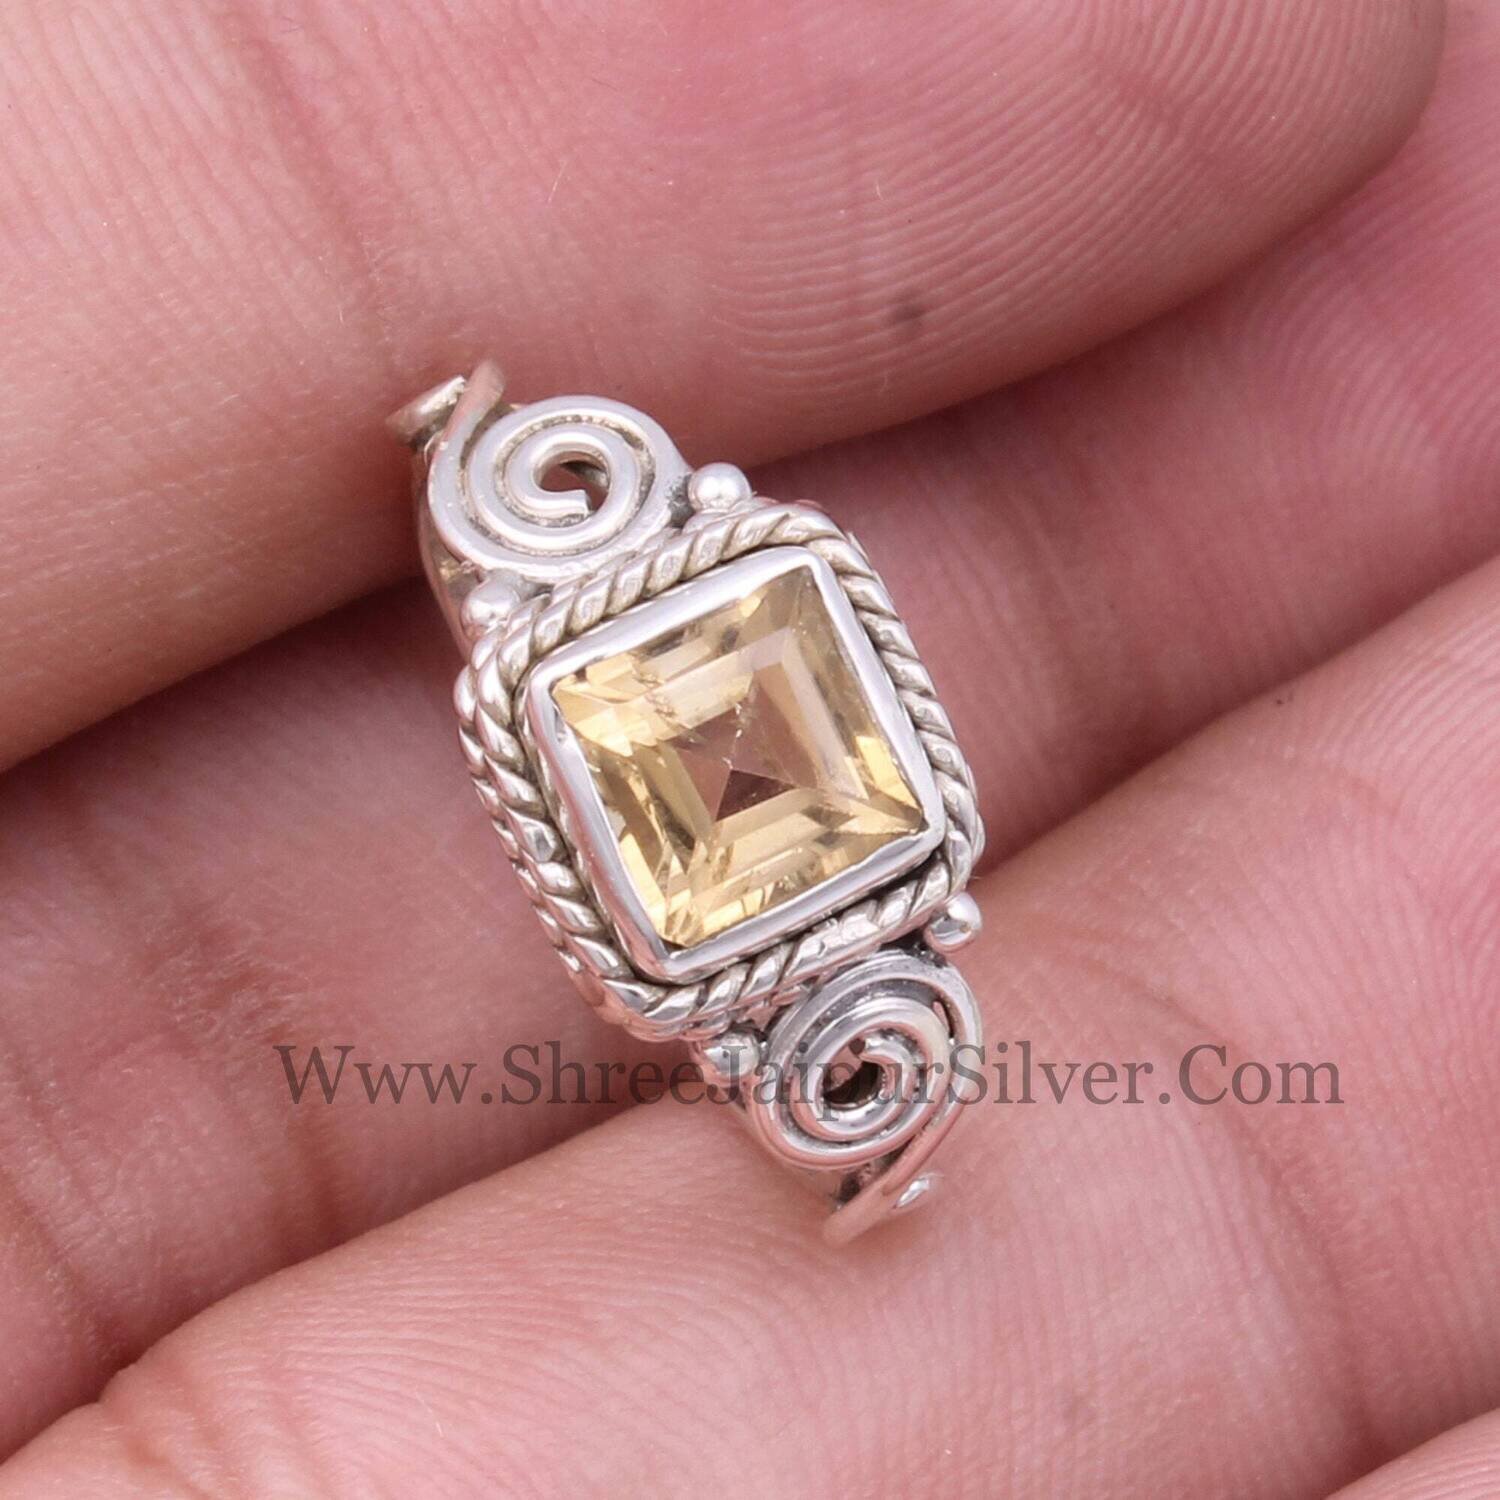 Natural Citrine Solid 925 Sterling Silver Ring For Women, Handmade Square Cut Gemstone Silver Spiral Ring For Wedding Anniversary Gifts Idea